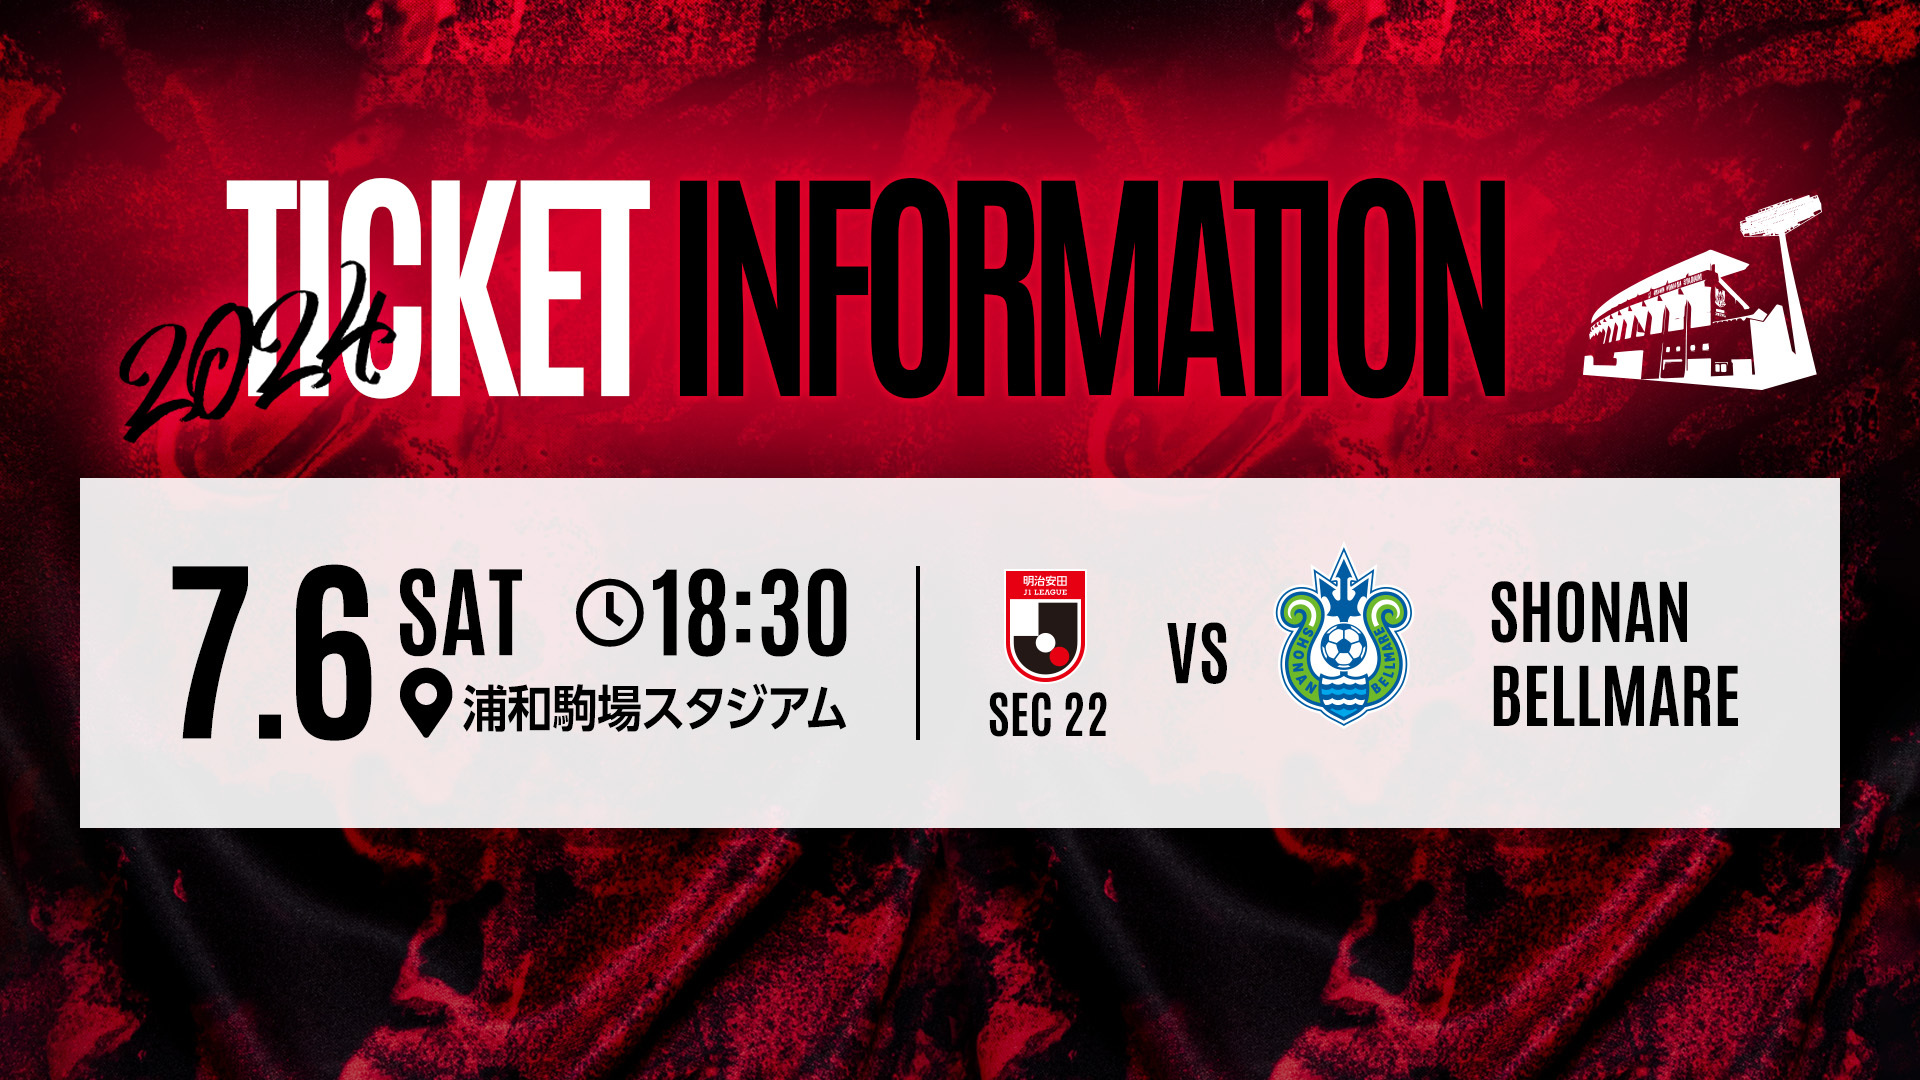 Ticket sales for the J1 League match against Shonan on Saturday, July 6th